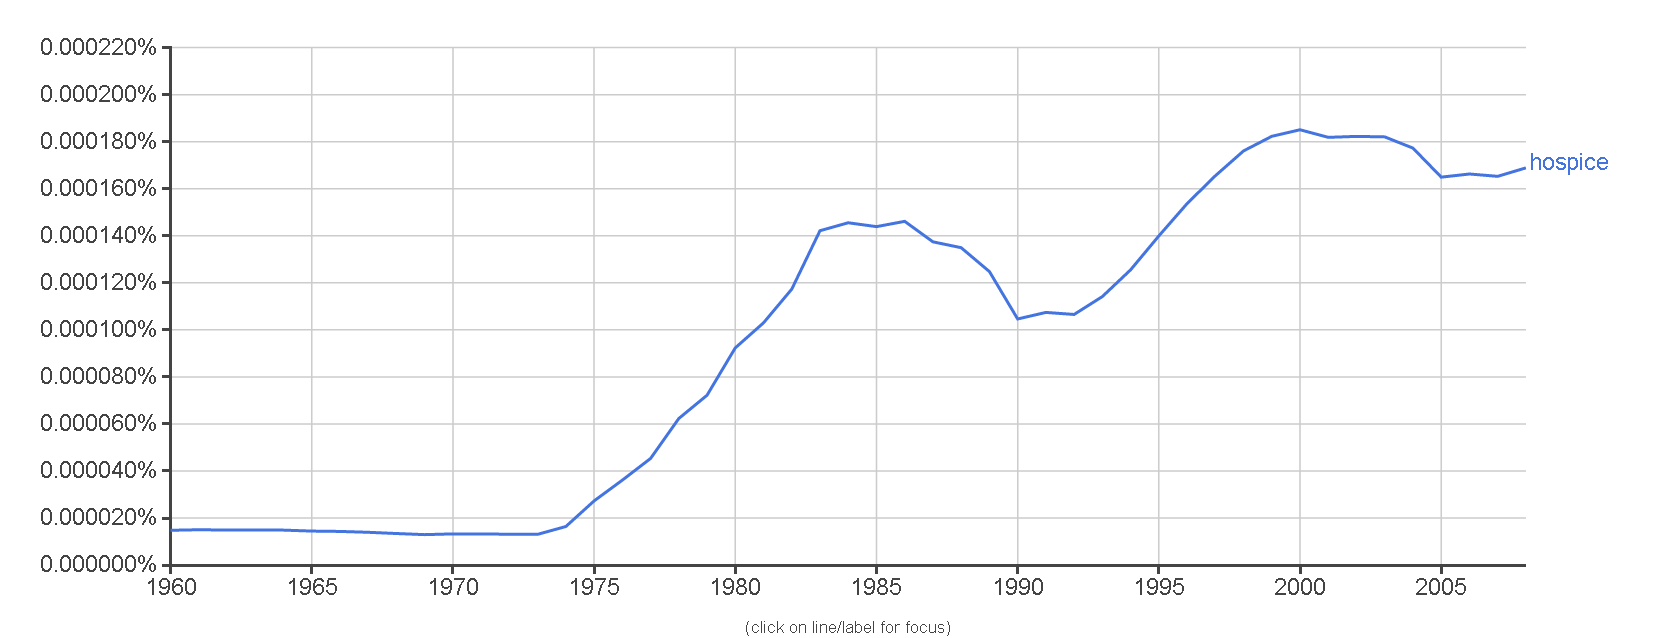 data showing use of the word hospice spiked upward around 1970